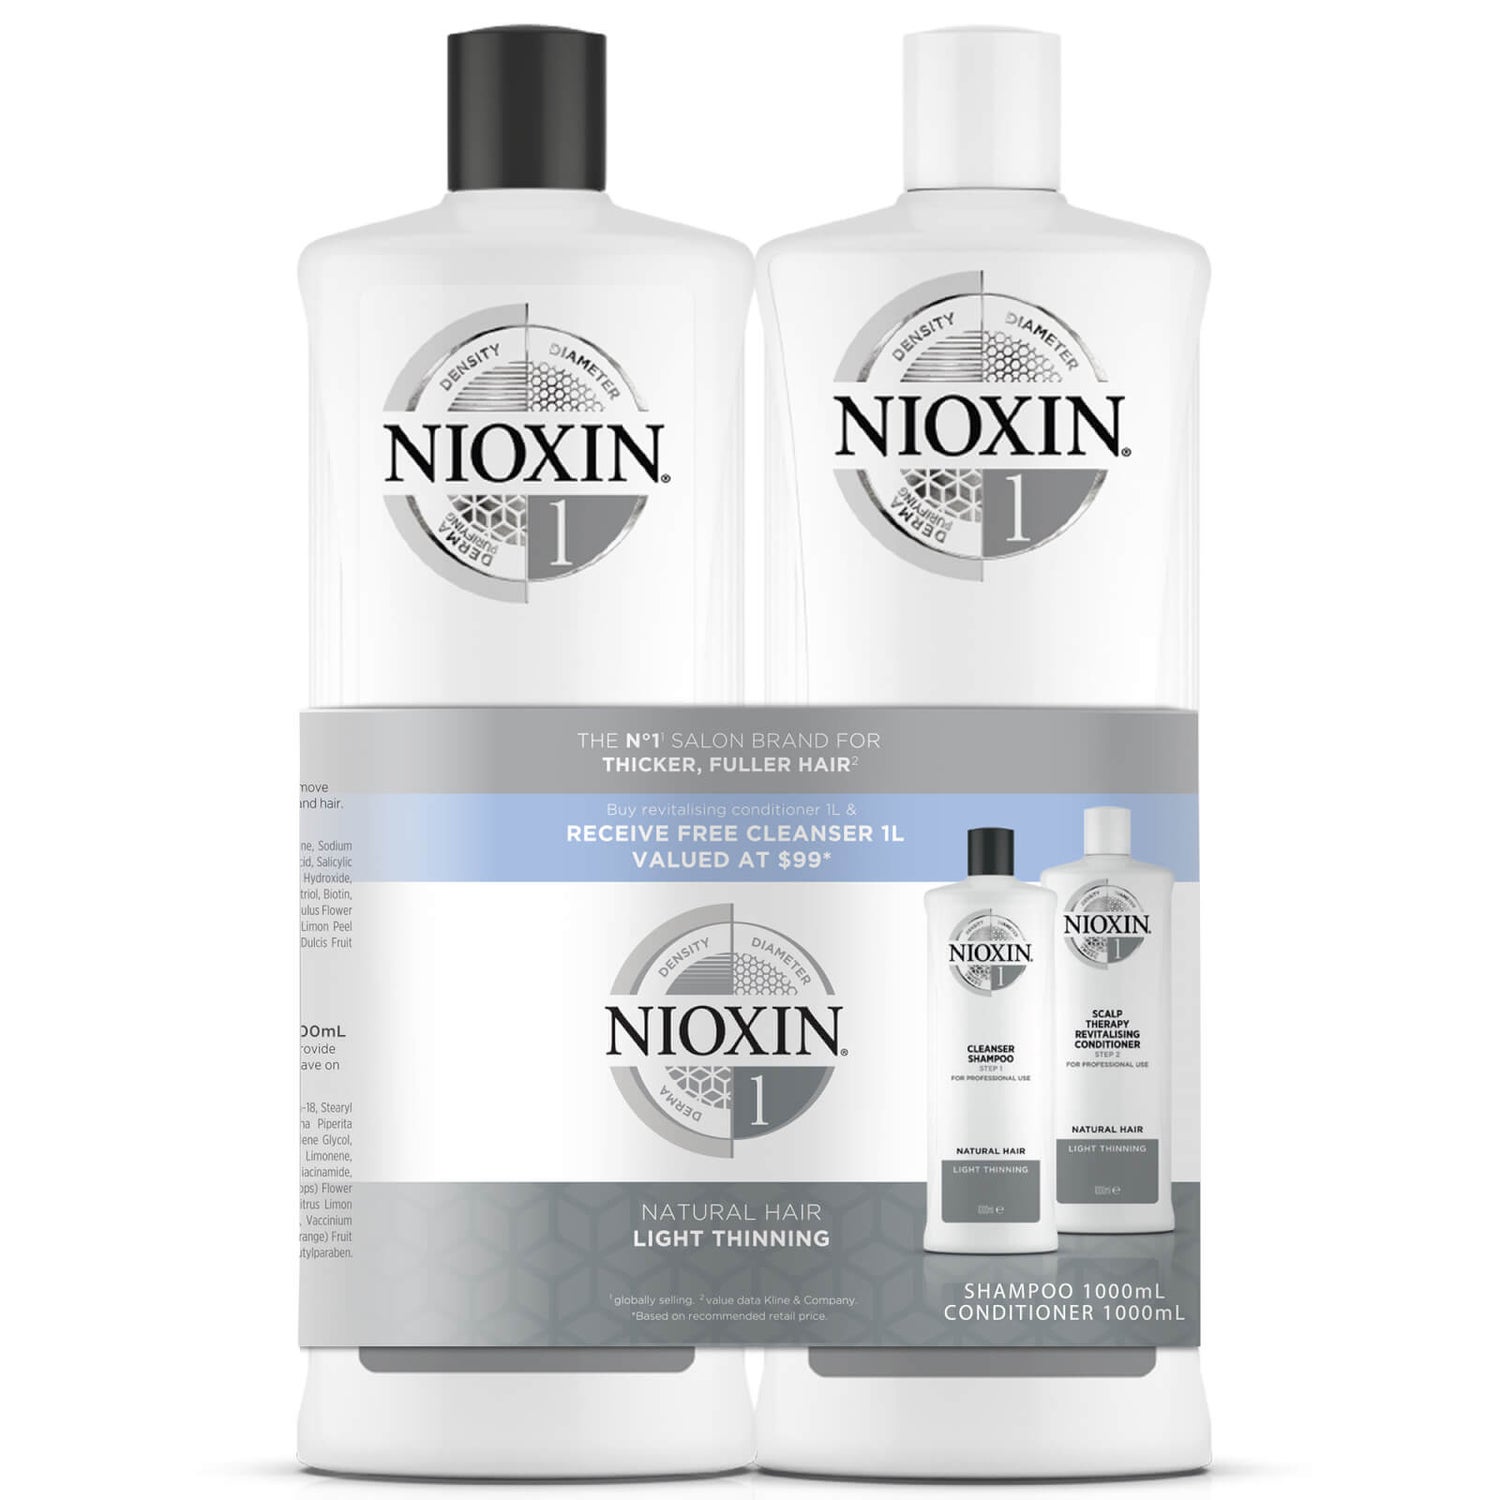 NIOXIN SYSTEM #1 1 L Shampoo and Conditioner Duo Pack